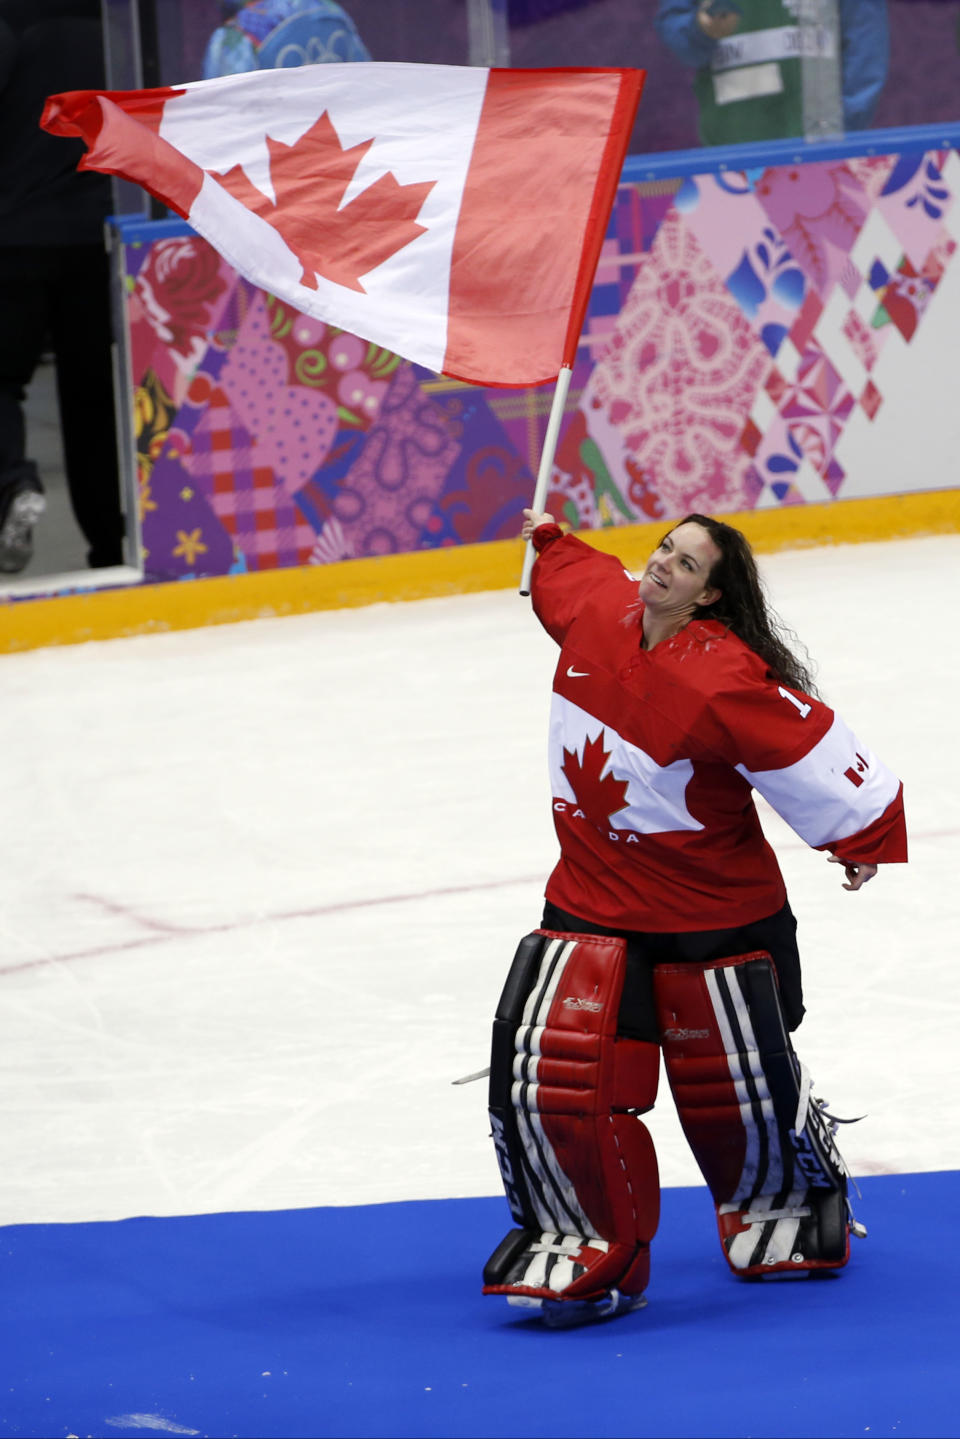 Goalkeeper Shannon Szabados of Canada (1) wave a flag after the women's gold medal ice hockey game against USA at the 2014 Winter Olympics, Thursday, Feb. 20, 2014, in Sochi, Russia. (AP Photo/Petr David Josek)